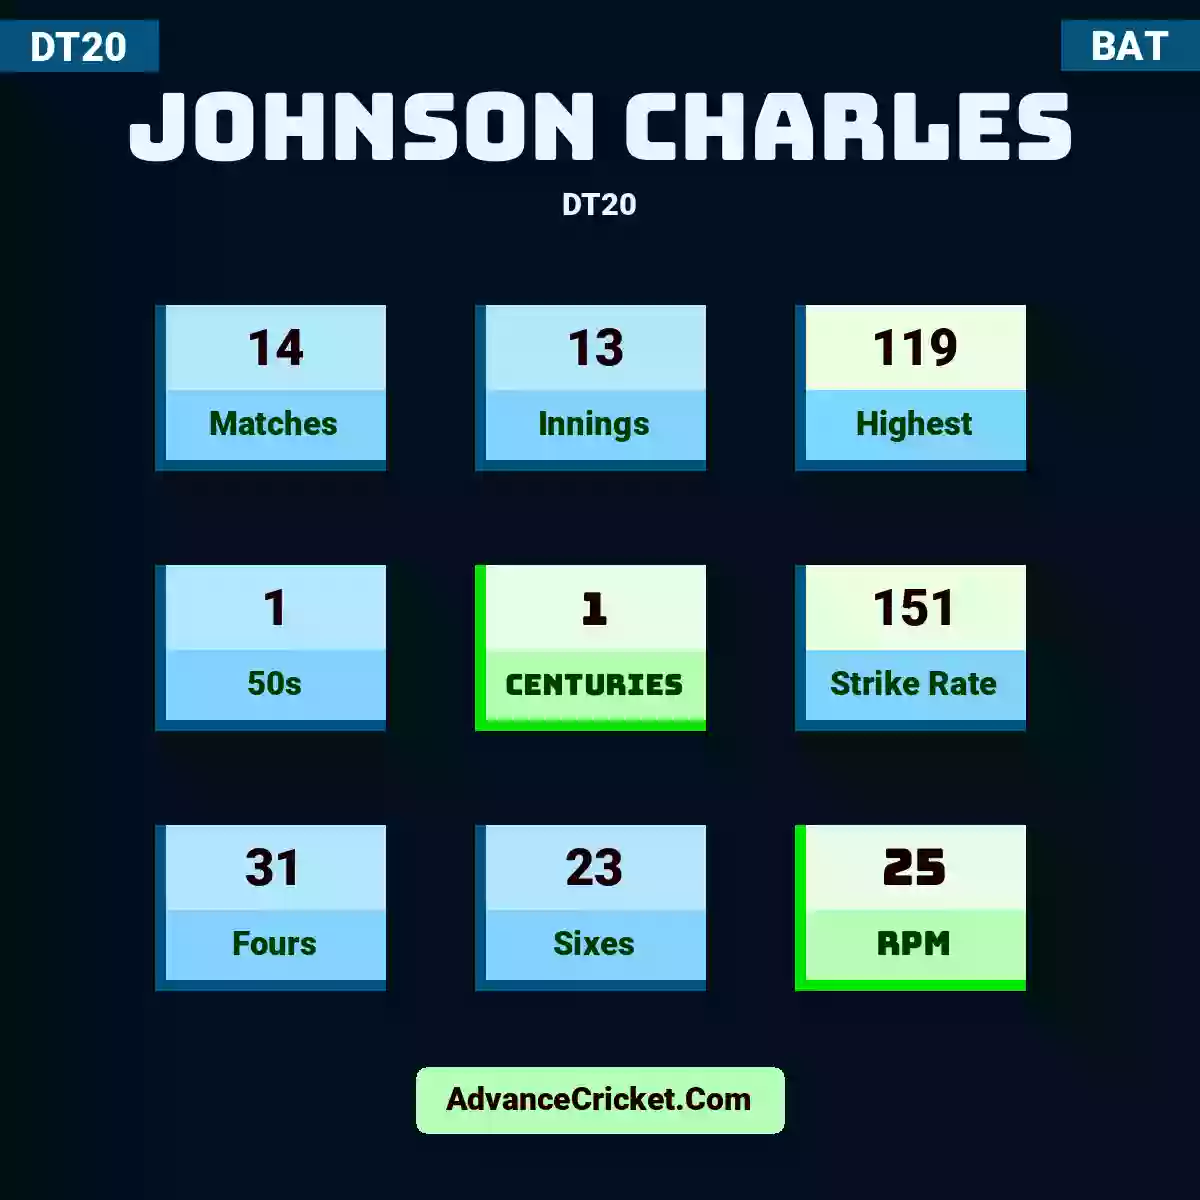 Johnson Charles DT20 , Johnson Charles played 14 matches, scored 119 runs as highest, 1 half-centuries, and 1 centuries, with a strike rate of 151. J.Charles hit 31 fours and 23 sixes, with an RPM of 25.